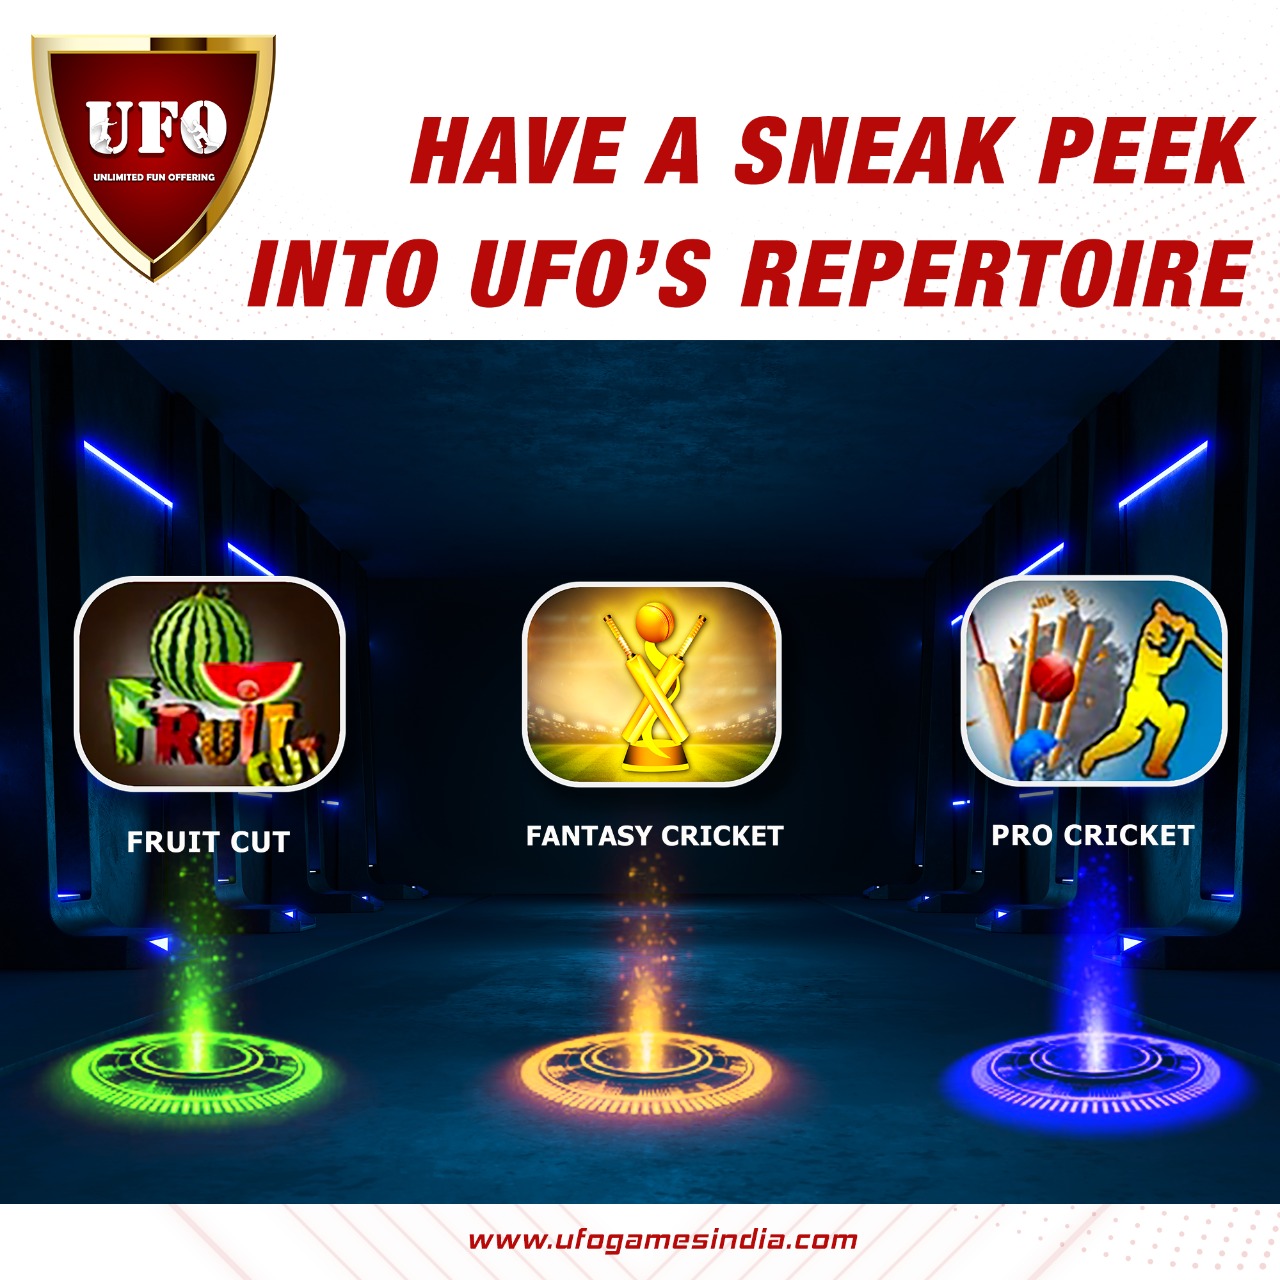 One of the prominent online gaming platforms in India , UFO Games providing amazing games like fantasy cricket , pro cricket , fruit cut etc in which you can play and win amazing prizes and real money as rewards. 

https://ufogamesindia.com/